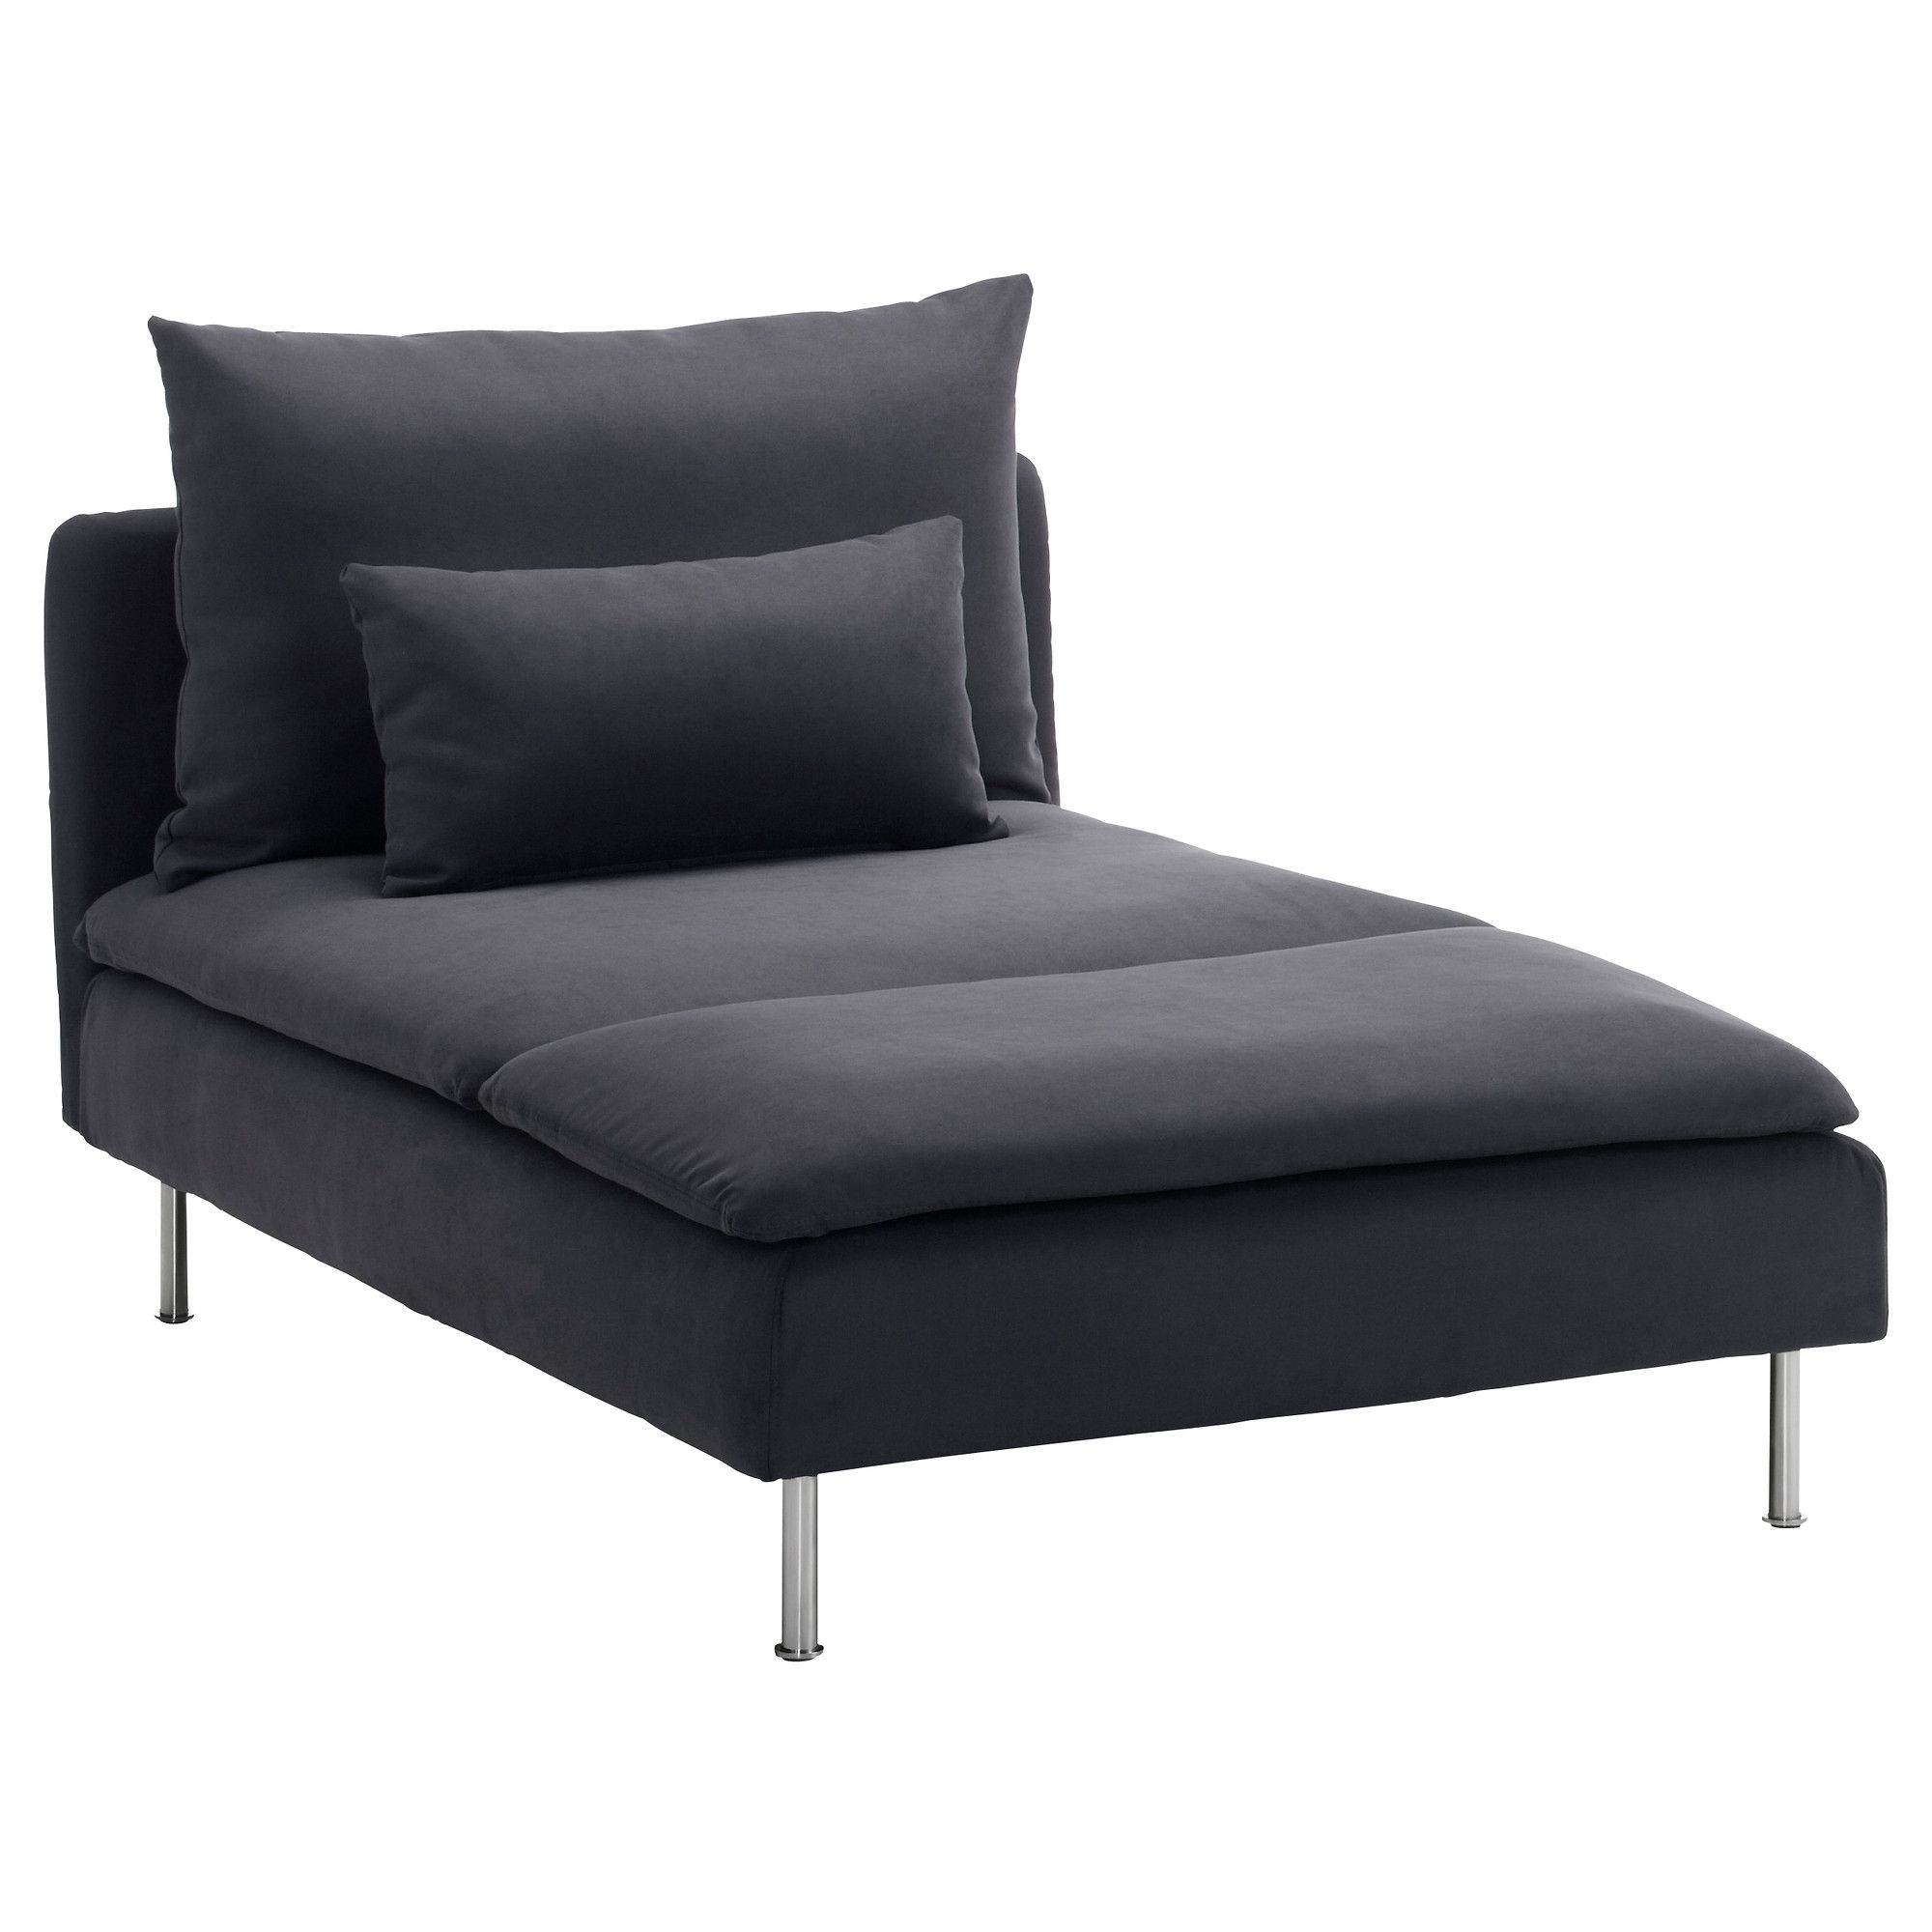 Current Söderhamn Chaise – Samsta Dark Gray – Ikea Intended For Ikea Chaise Lounge Chairs (View 4 of 15)